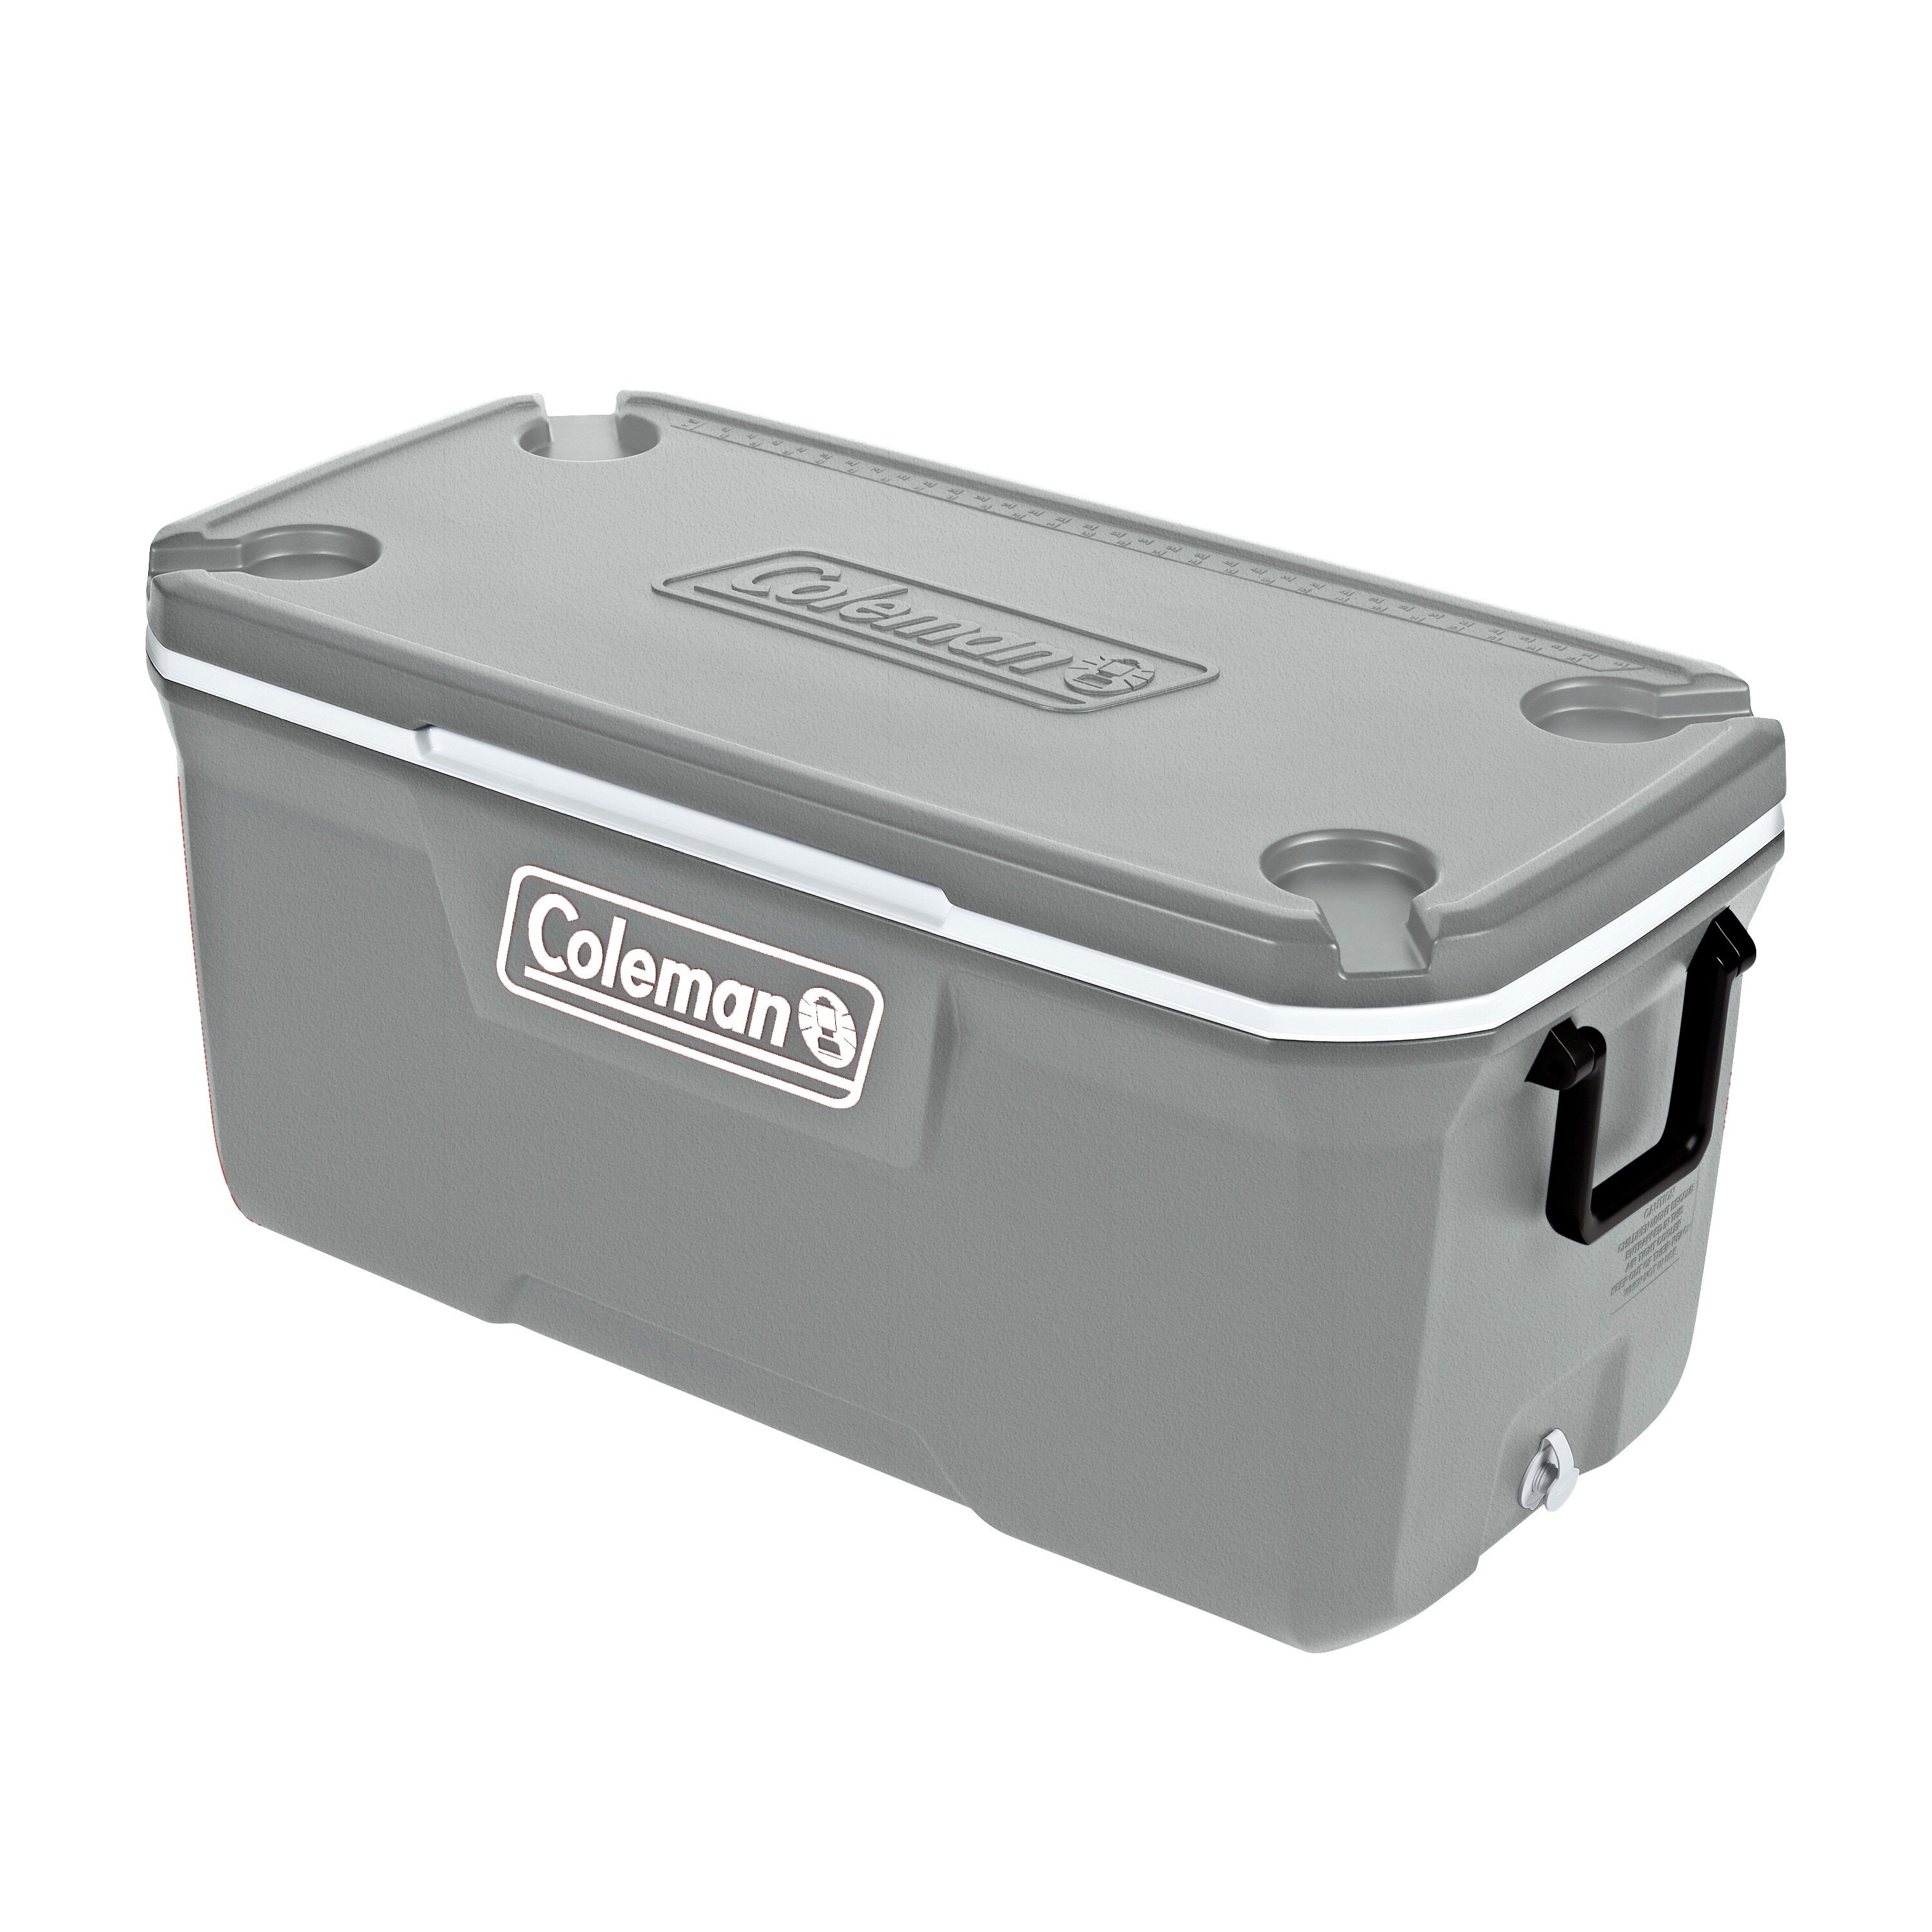 Marine Portable Cooler 120 Qt Leak-Resistant Fishing Camping Ice Storage Chest 